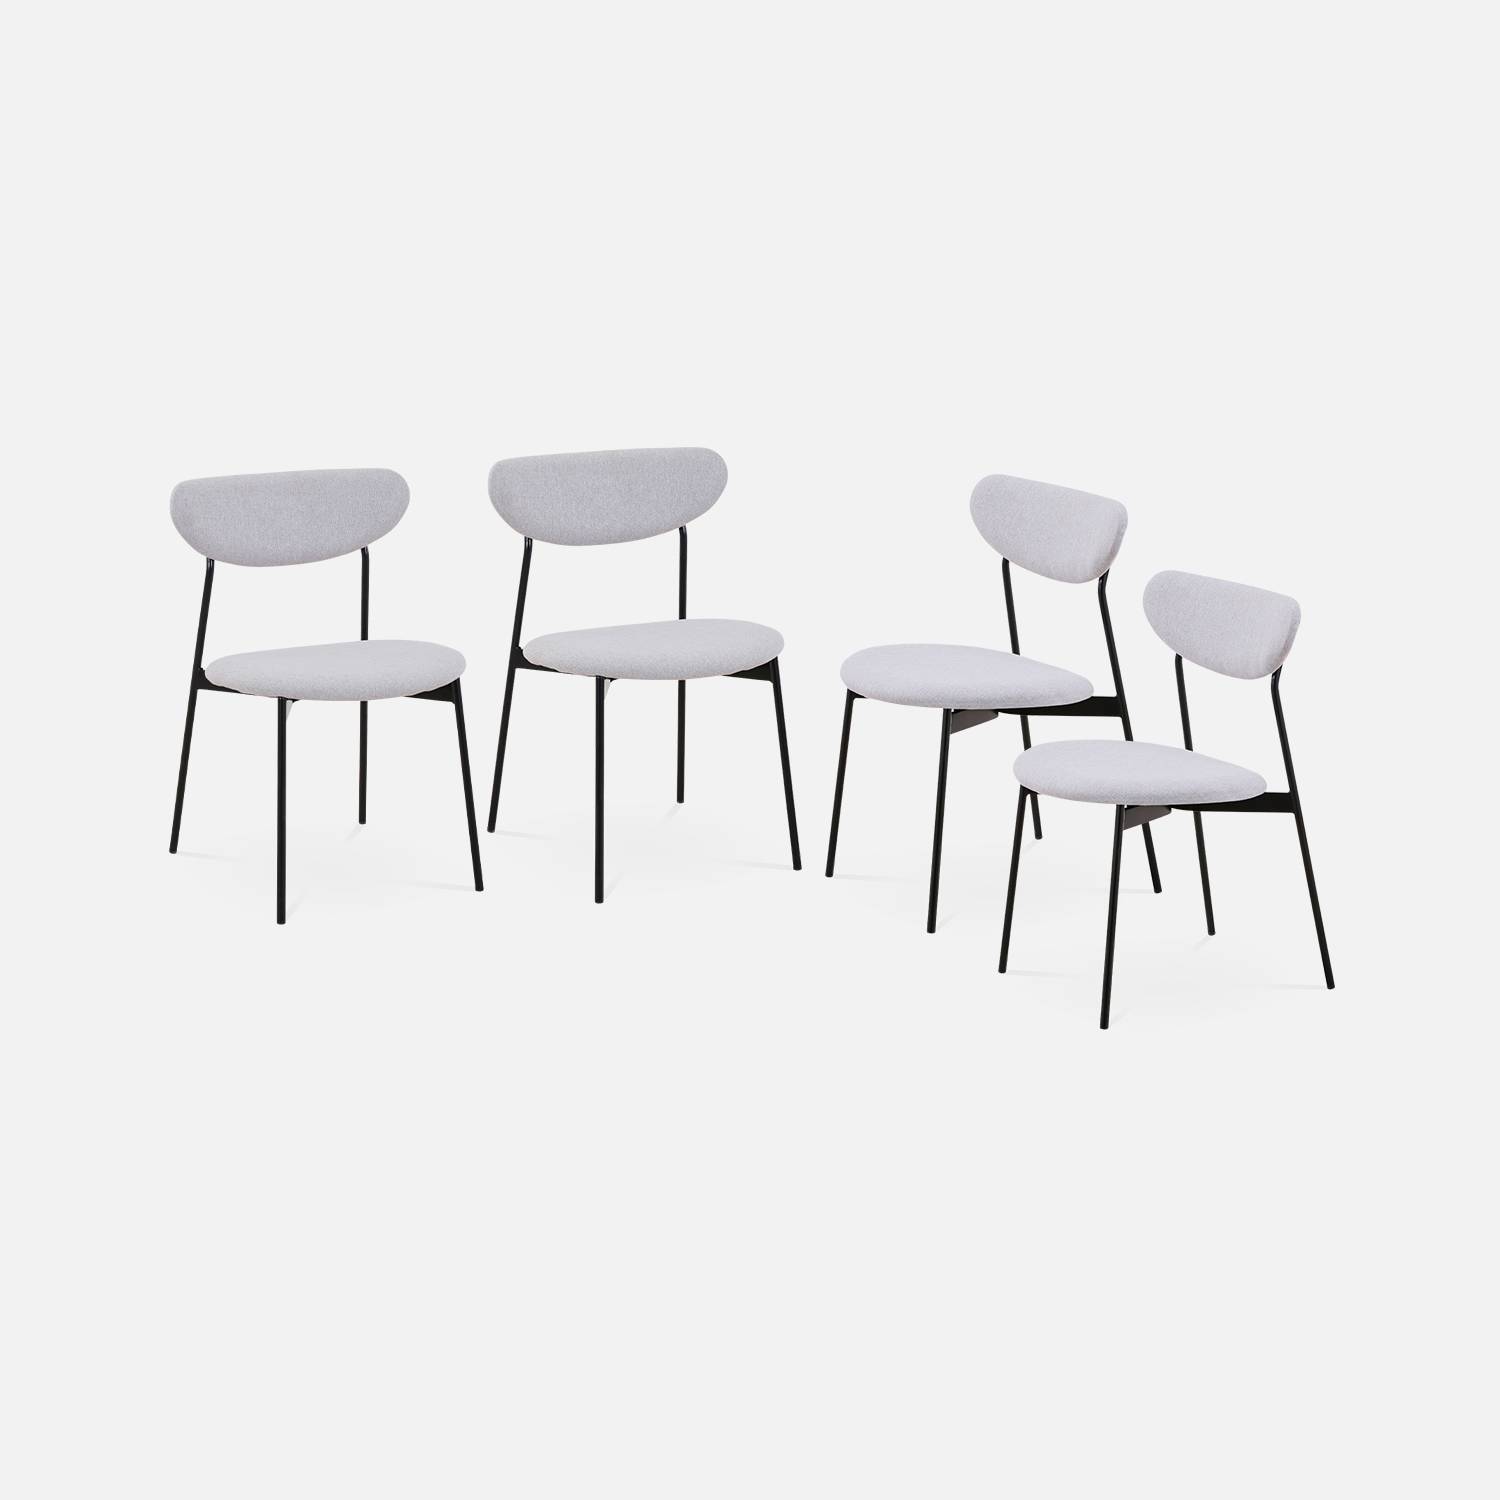 Set of 4 retro style dining chairs with steel legs, Light Grey | sweeek